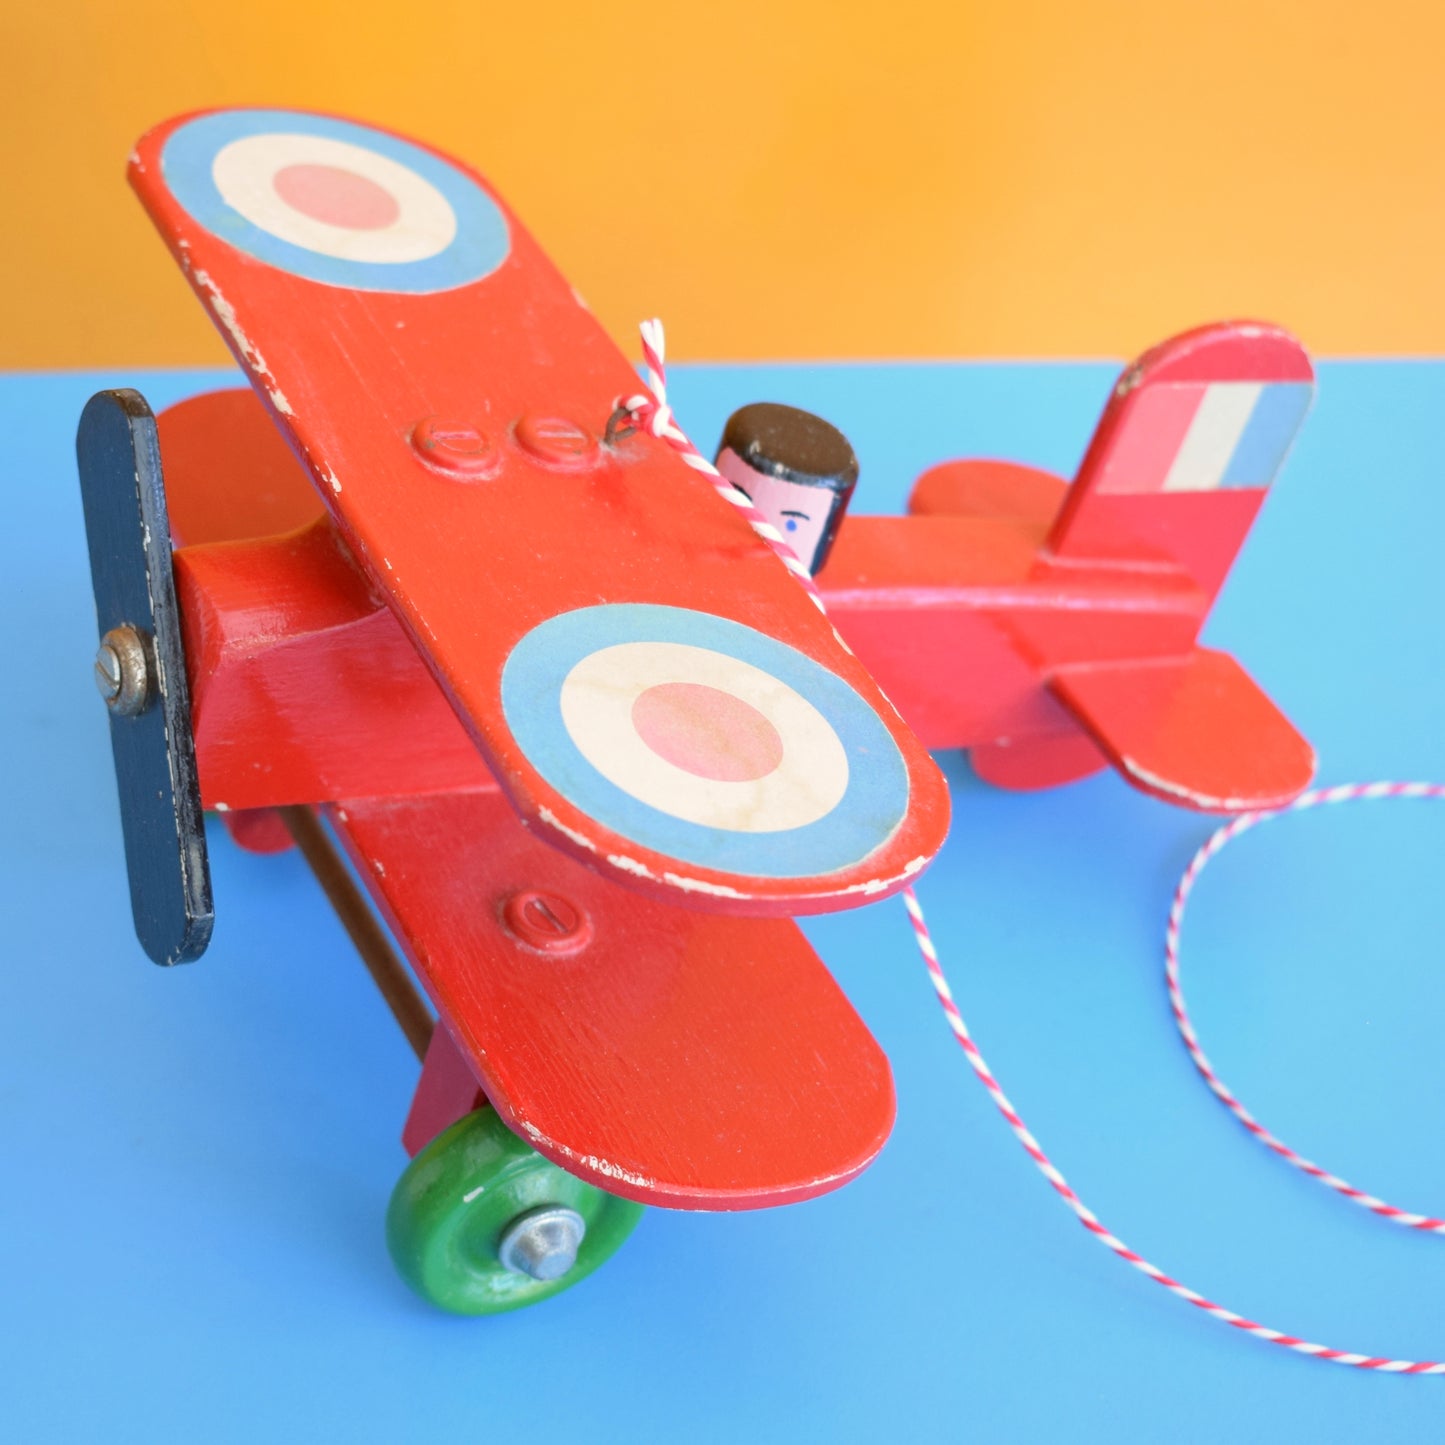 Vintage 1980s Hanging Wooden Plane Toy - Red Baron